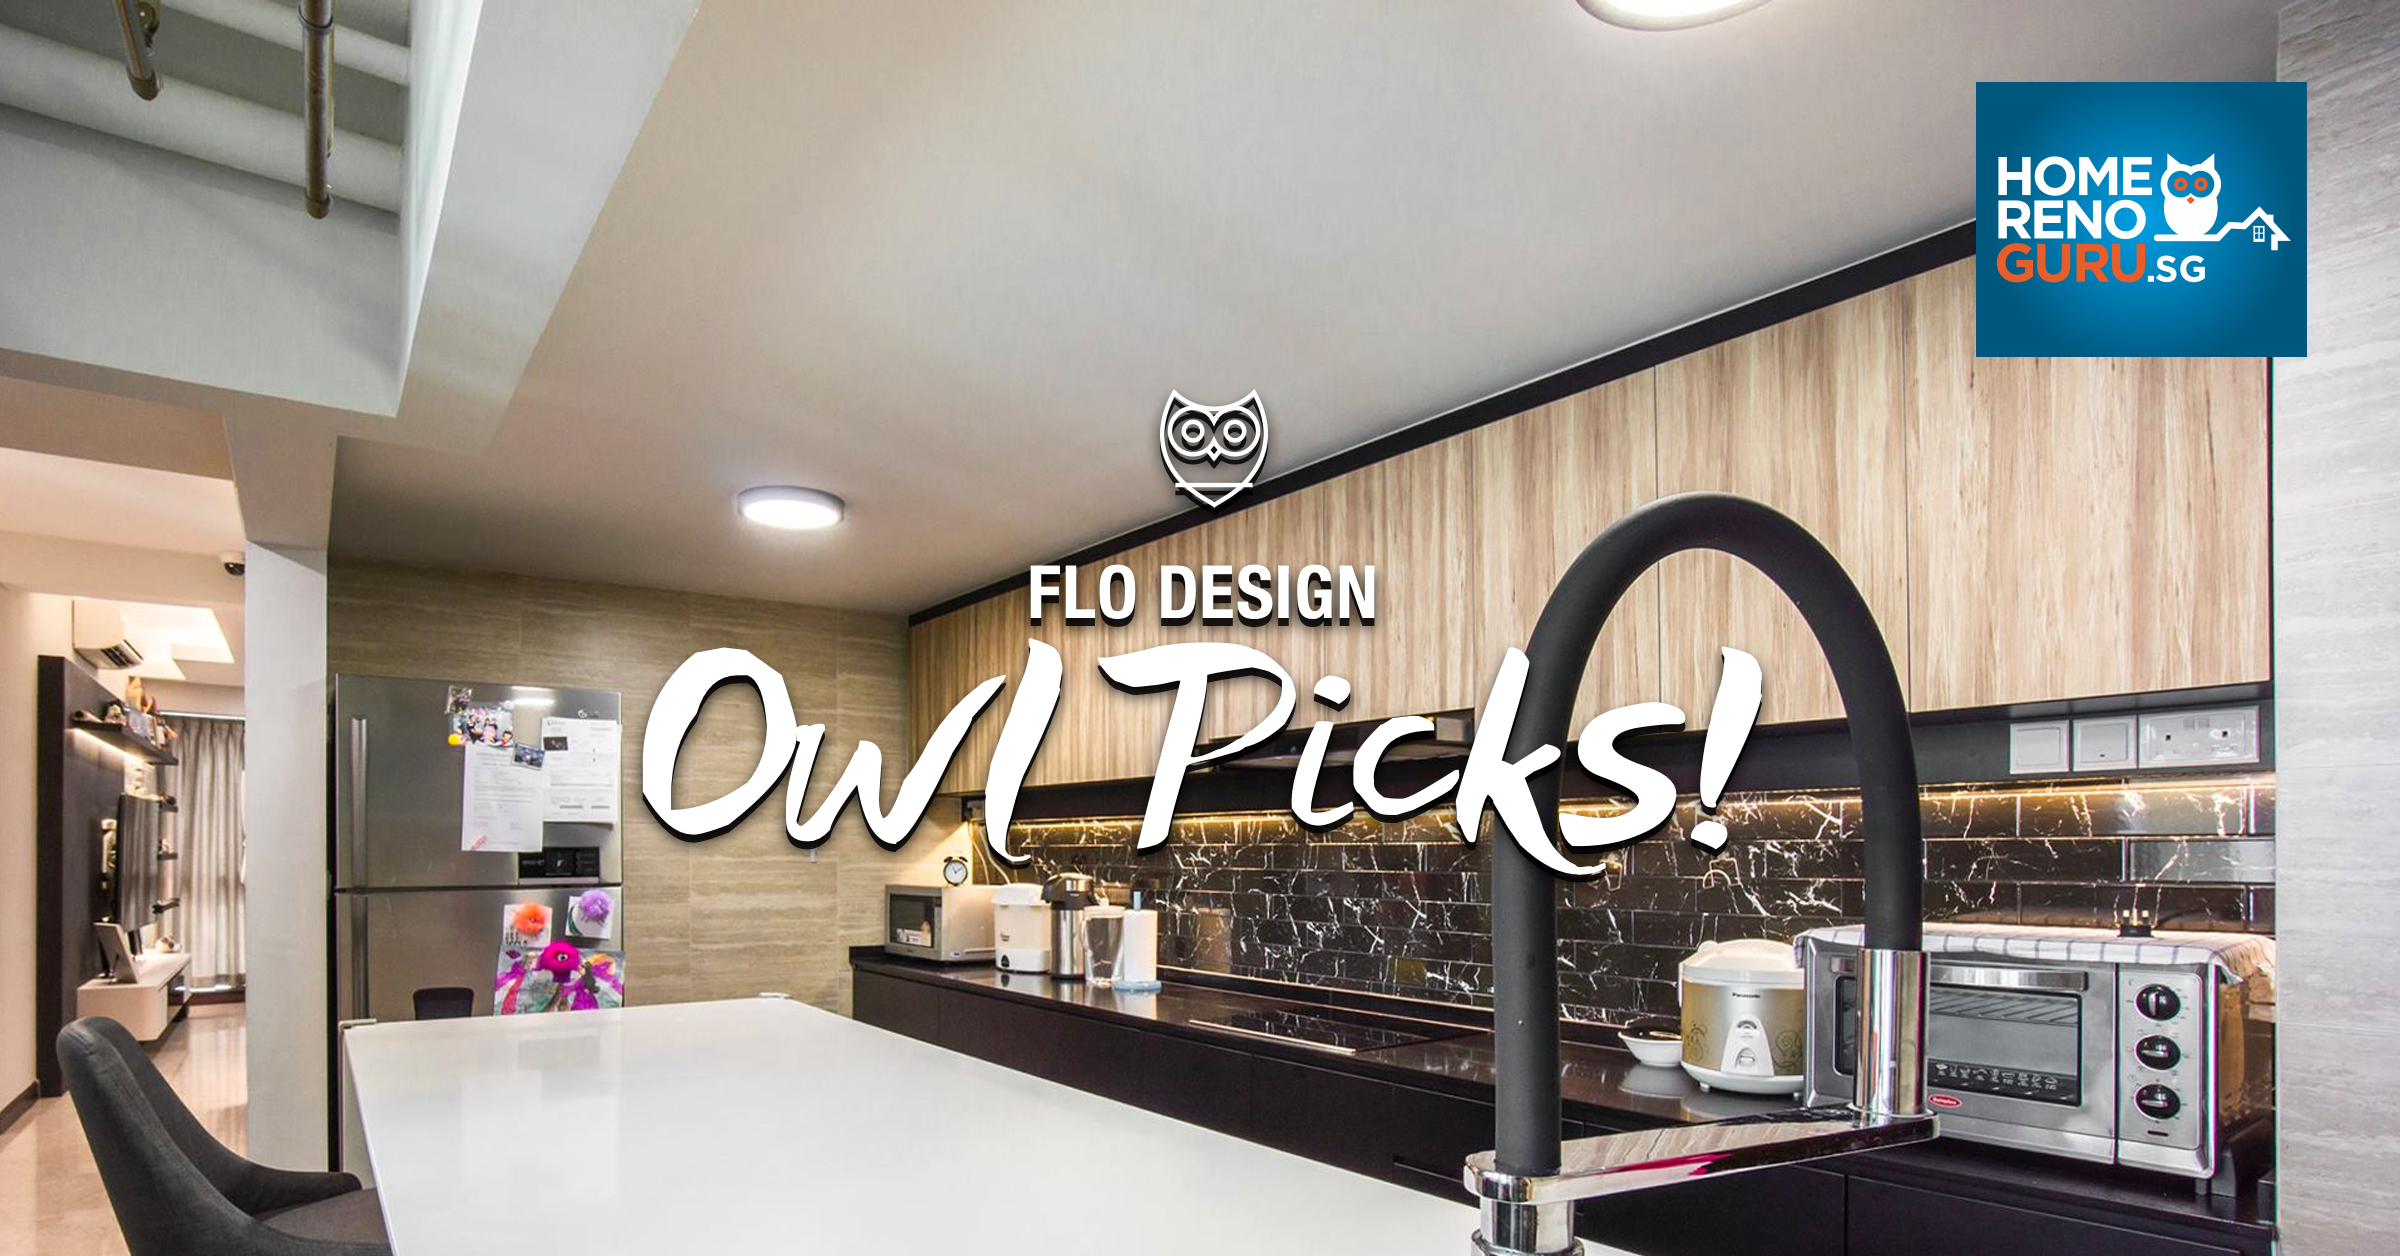 Unusual Homes: An Insight into the Design Process with Flo Design